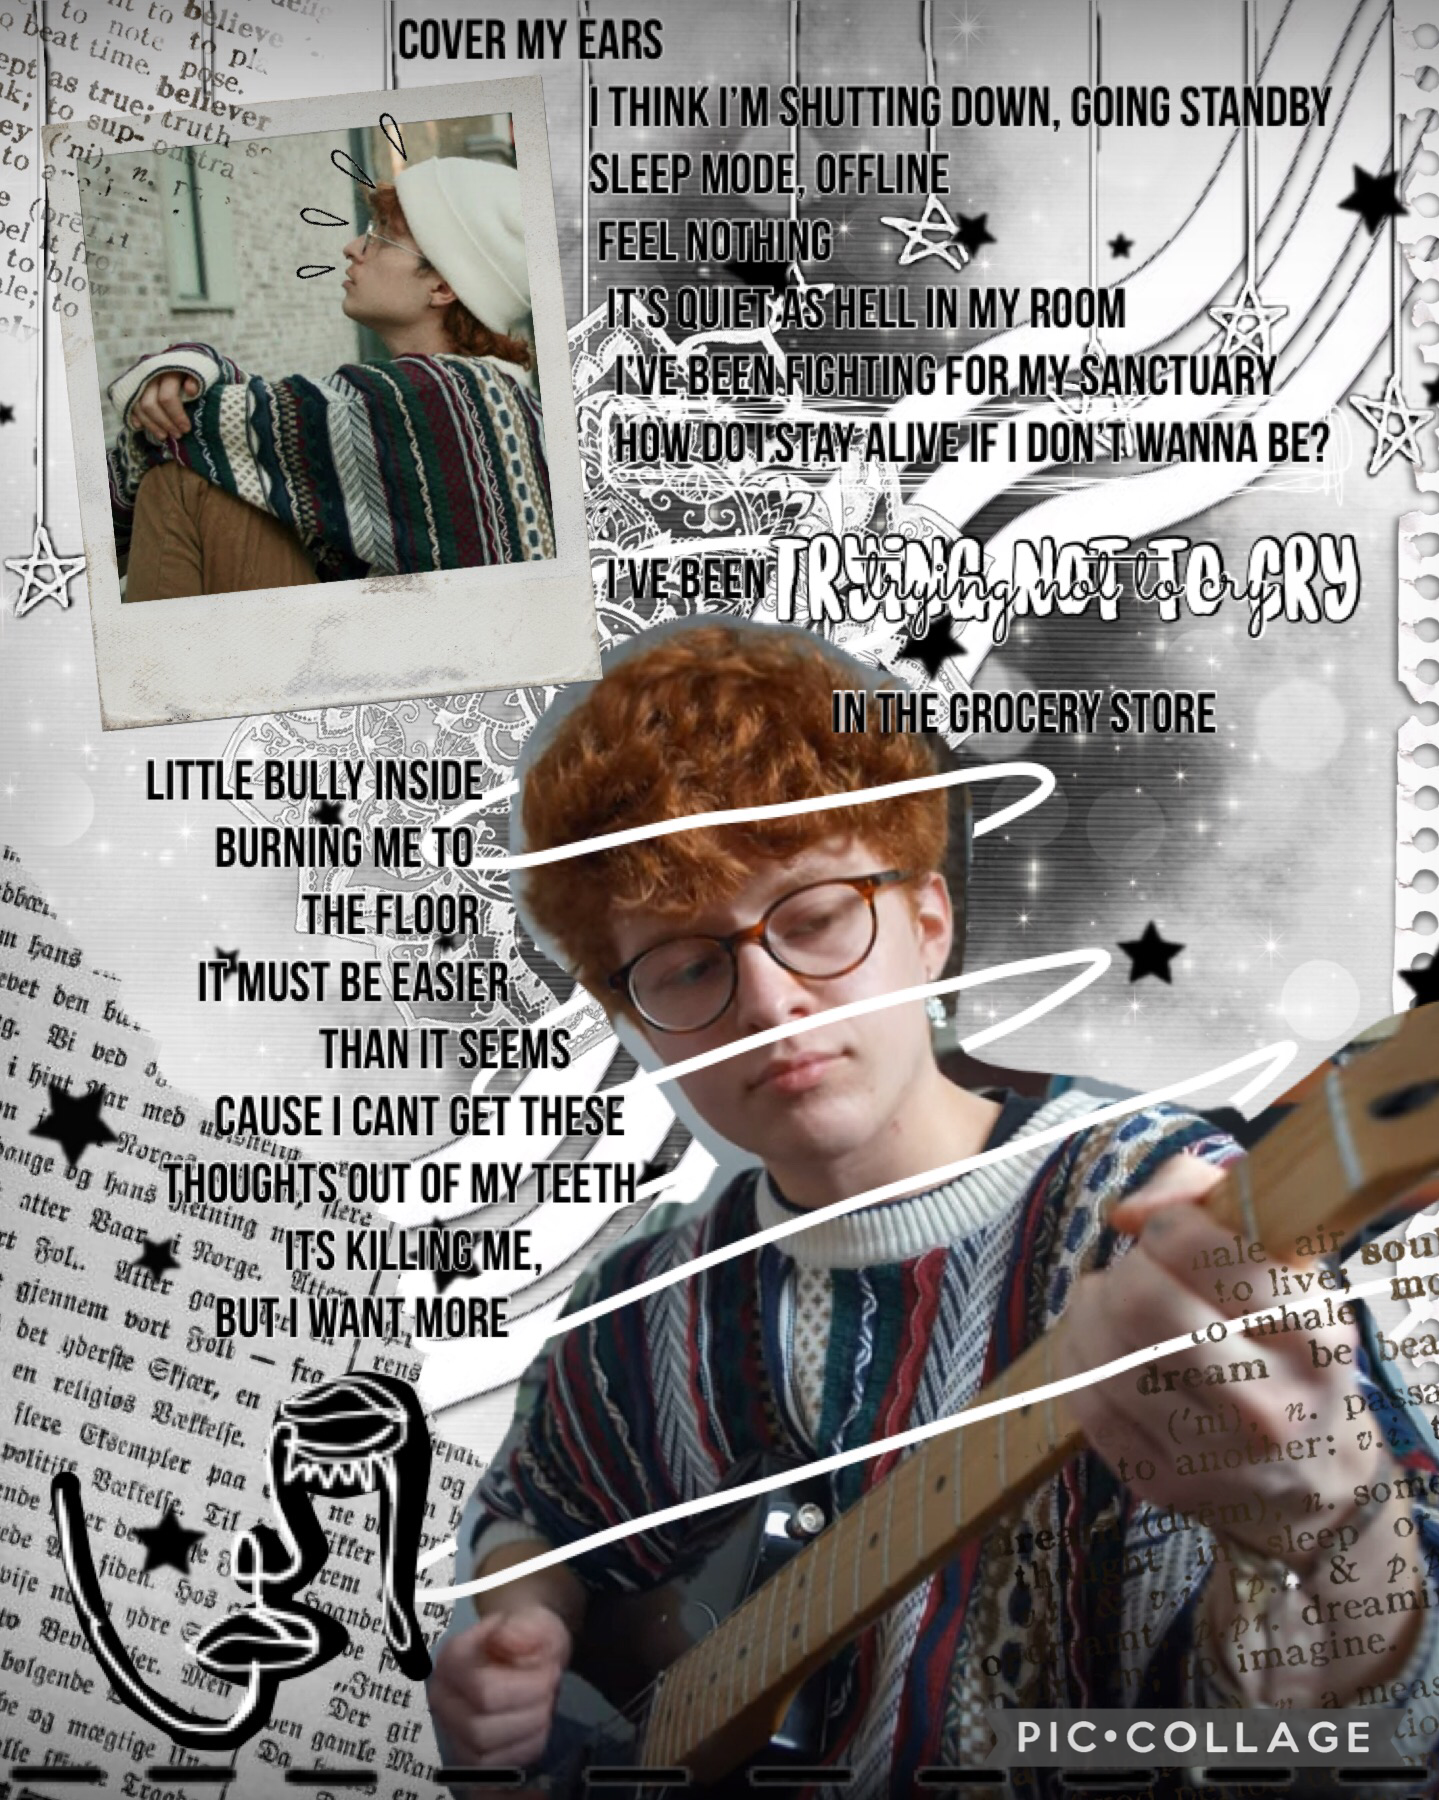 🖤 TAP 🖤
🖤 Cavetown Trying Not To Cry aesthetic 🖤
🖤 this was a vent bc life sucks rn 🖤
🖤 im binge watching B99 🖤
🖤 i might see cavetown live 🤞🤞🖤
🖤 ILYSM 🖤